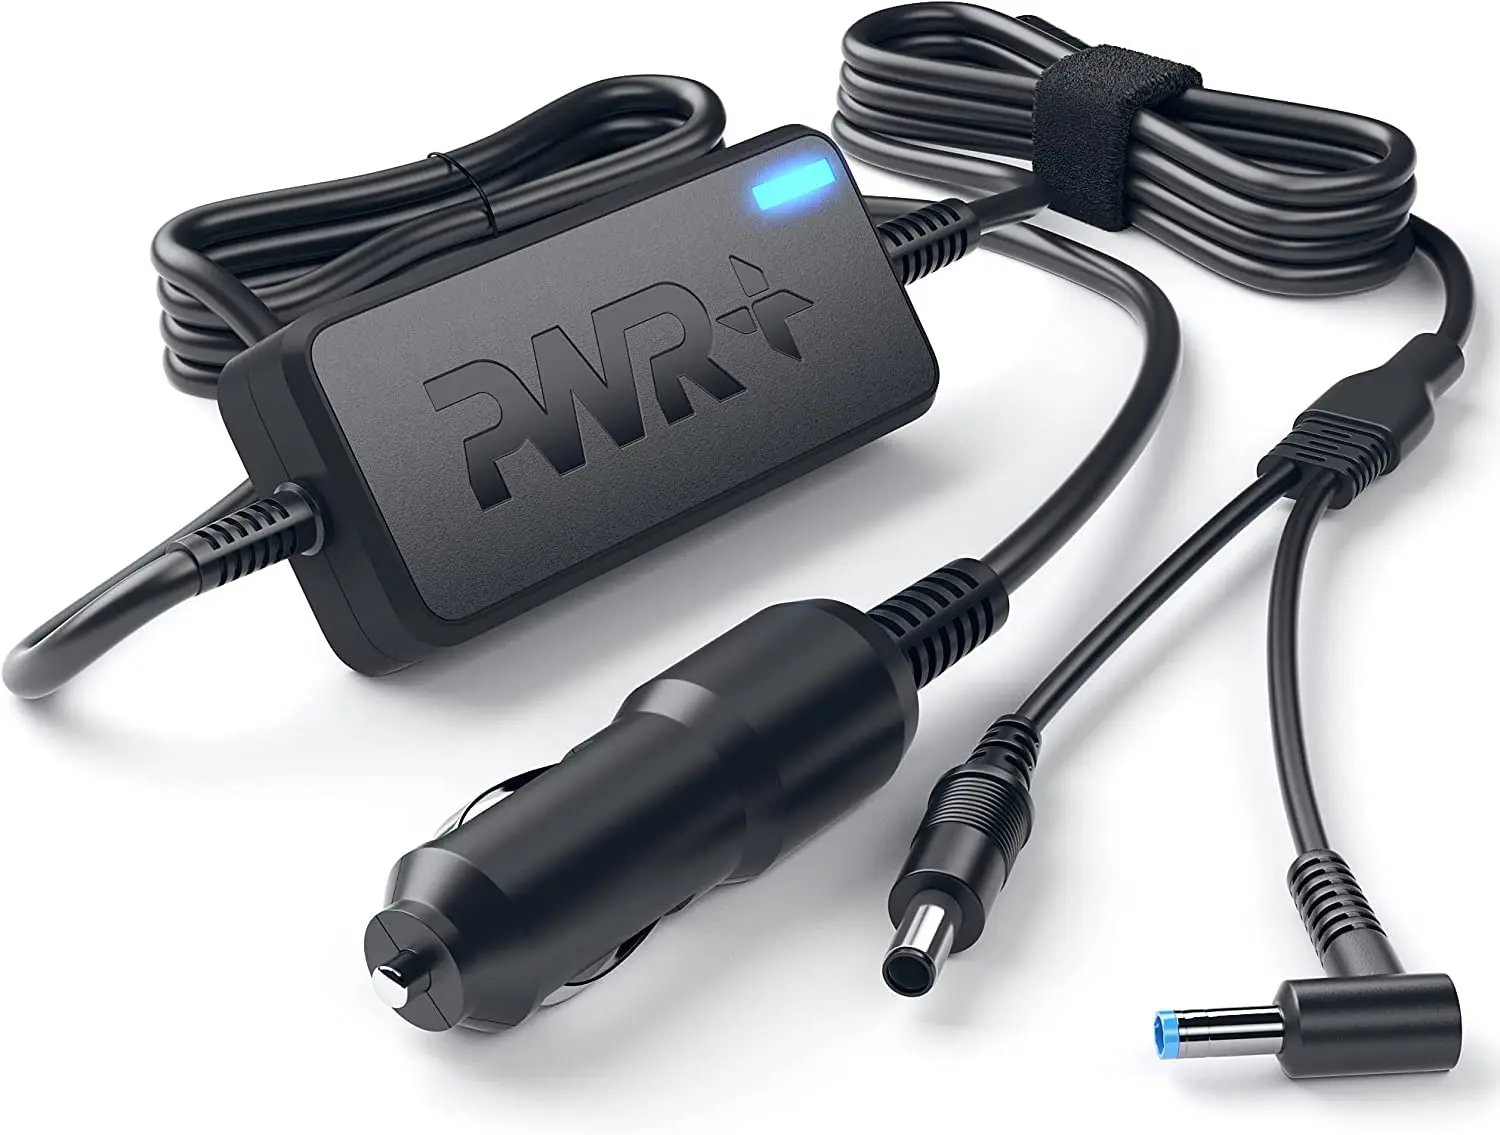 hewlett packard laptop car charger - Can I charge laptop with car charger